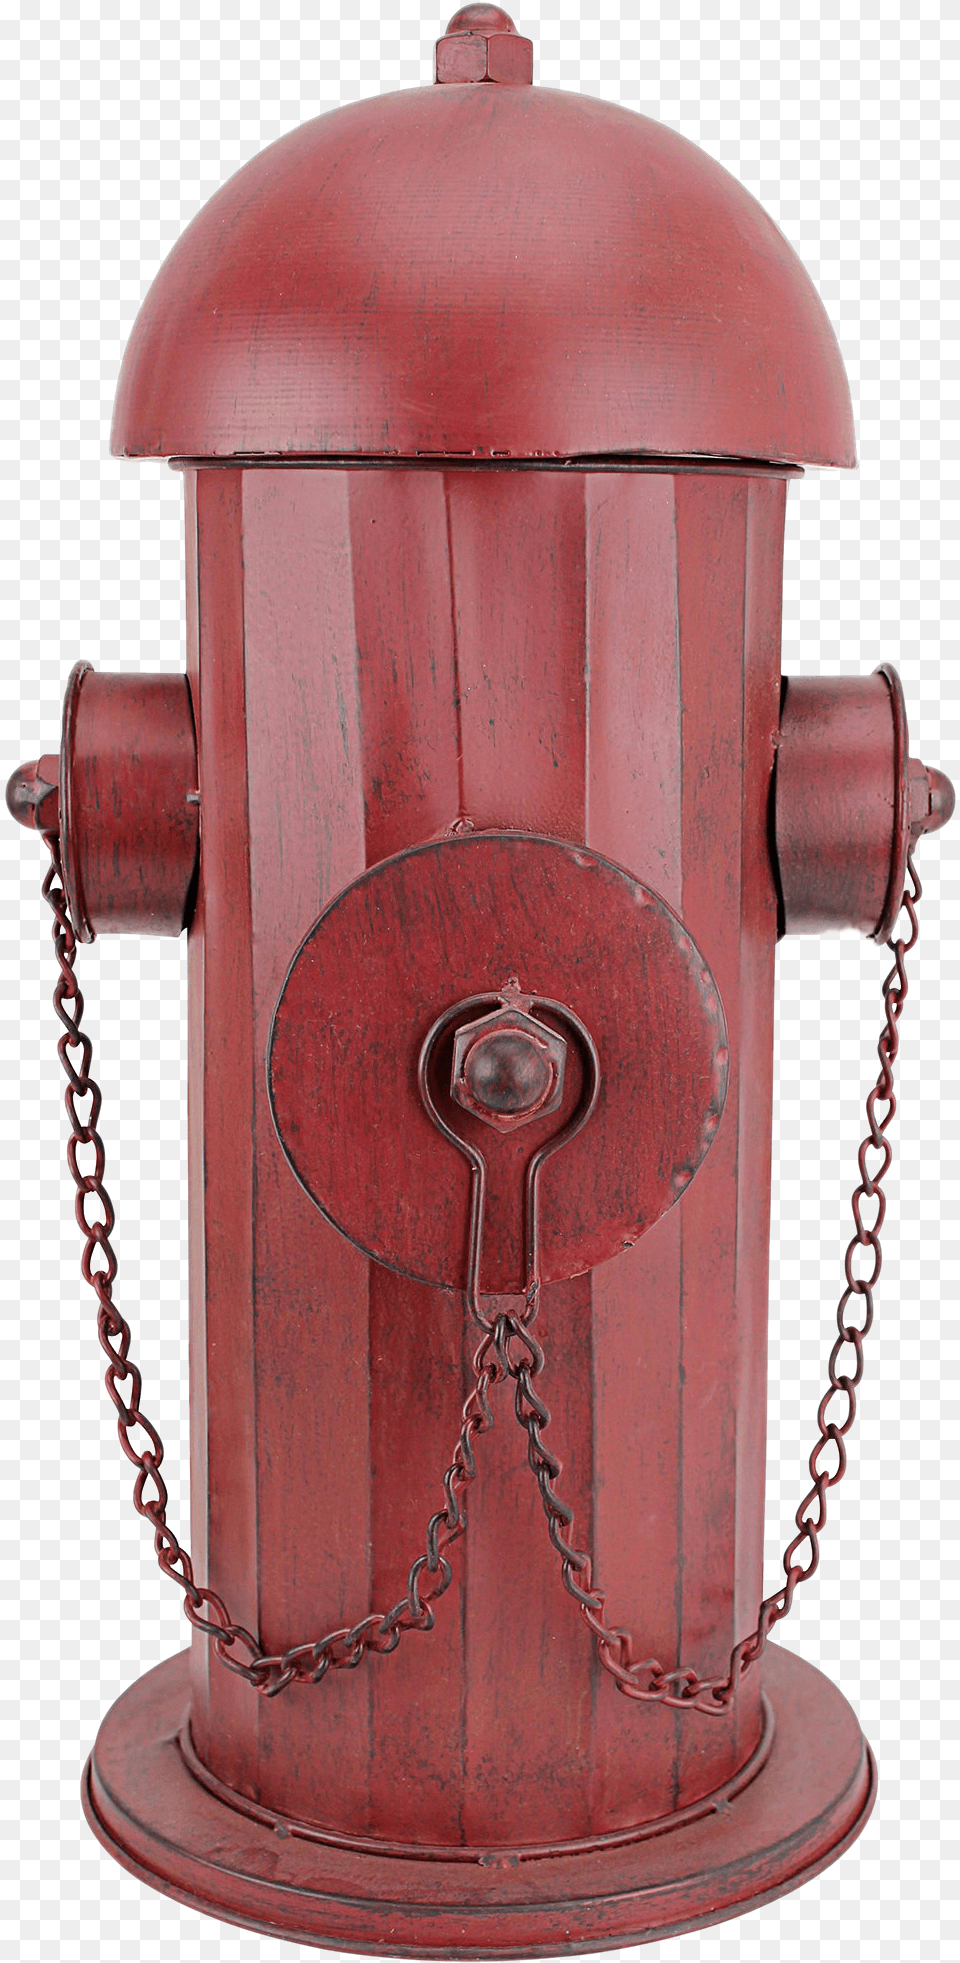 Red Fire Hydrant Machine, Mailbox, Fire Hydrant Free Transparent Png